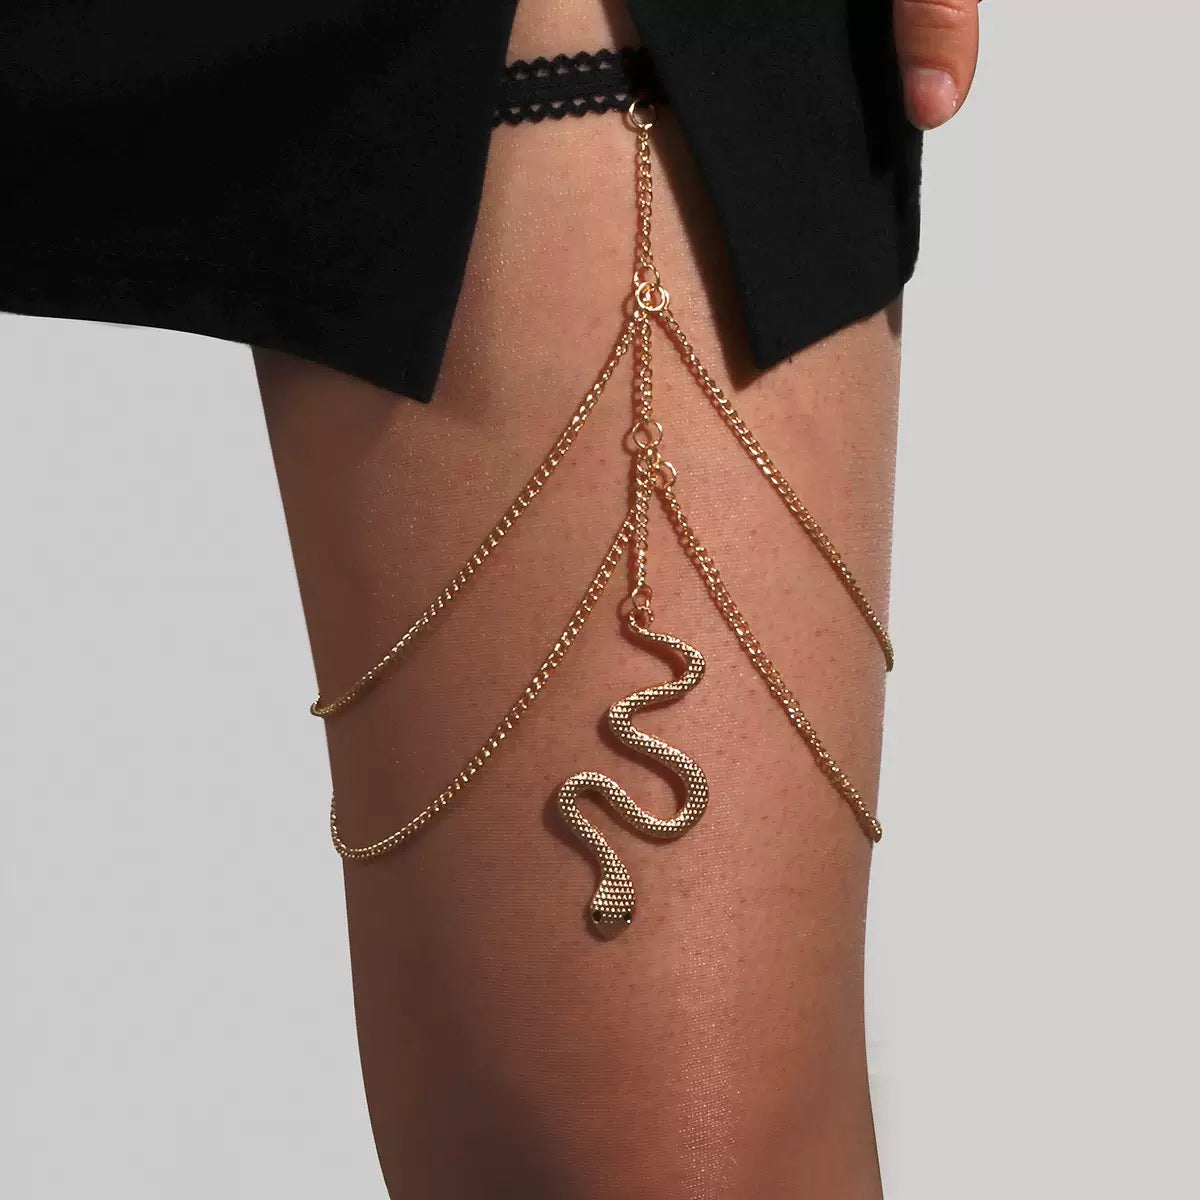 Gothic Leg Chains - A Dark and Edgy Accessory to Elevate Your Outfit